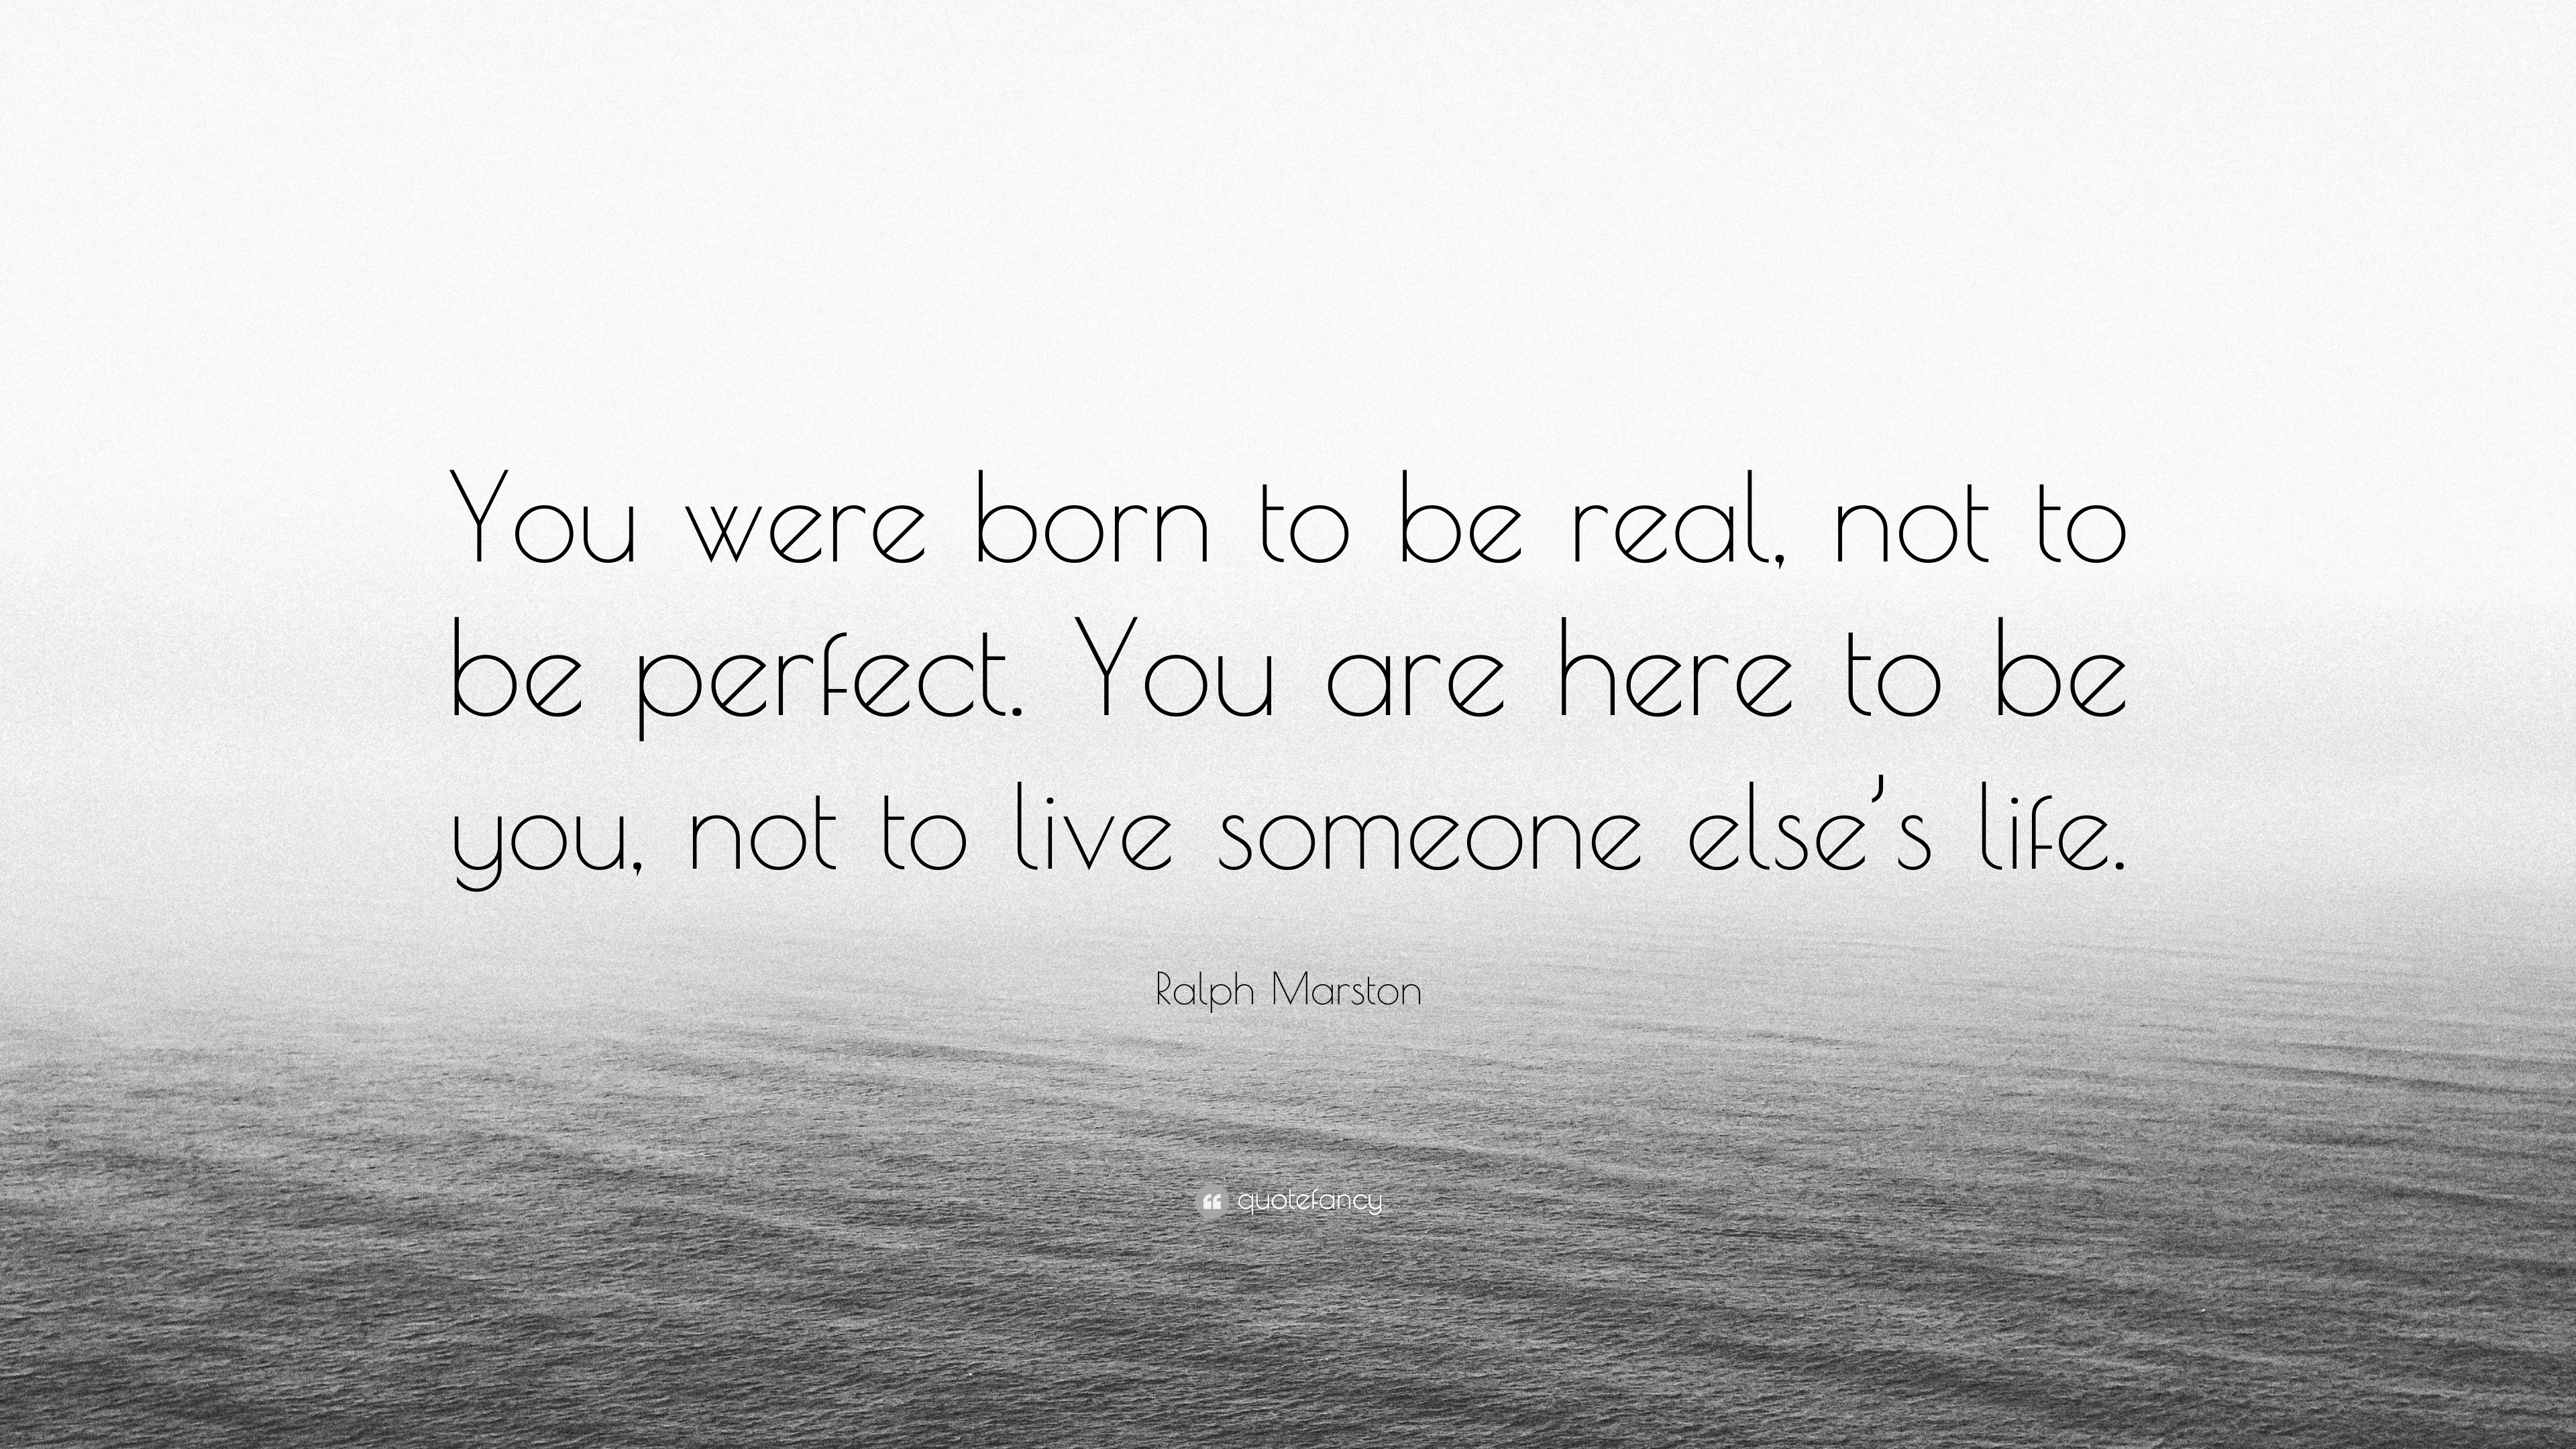 Ralph Marston Quote: “You were born to be real, not to be perfect. You